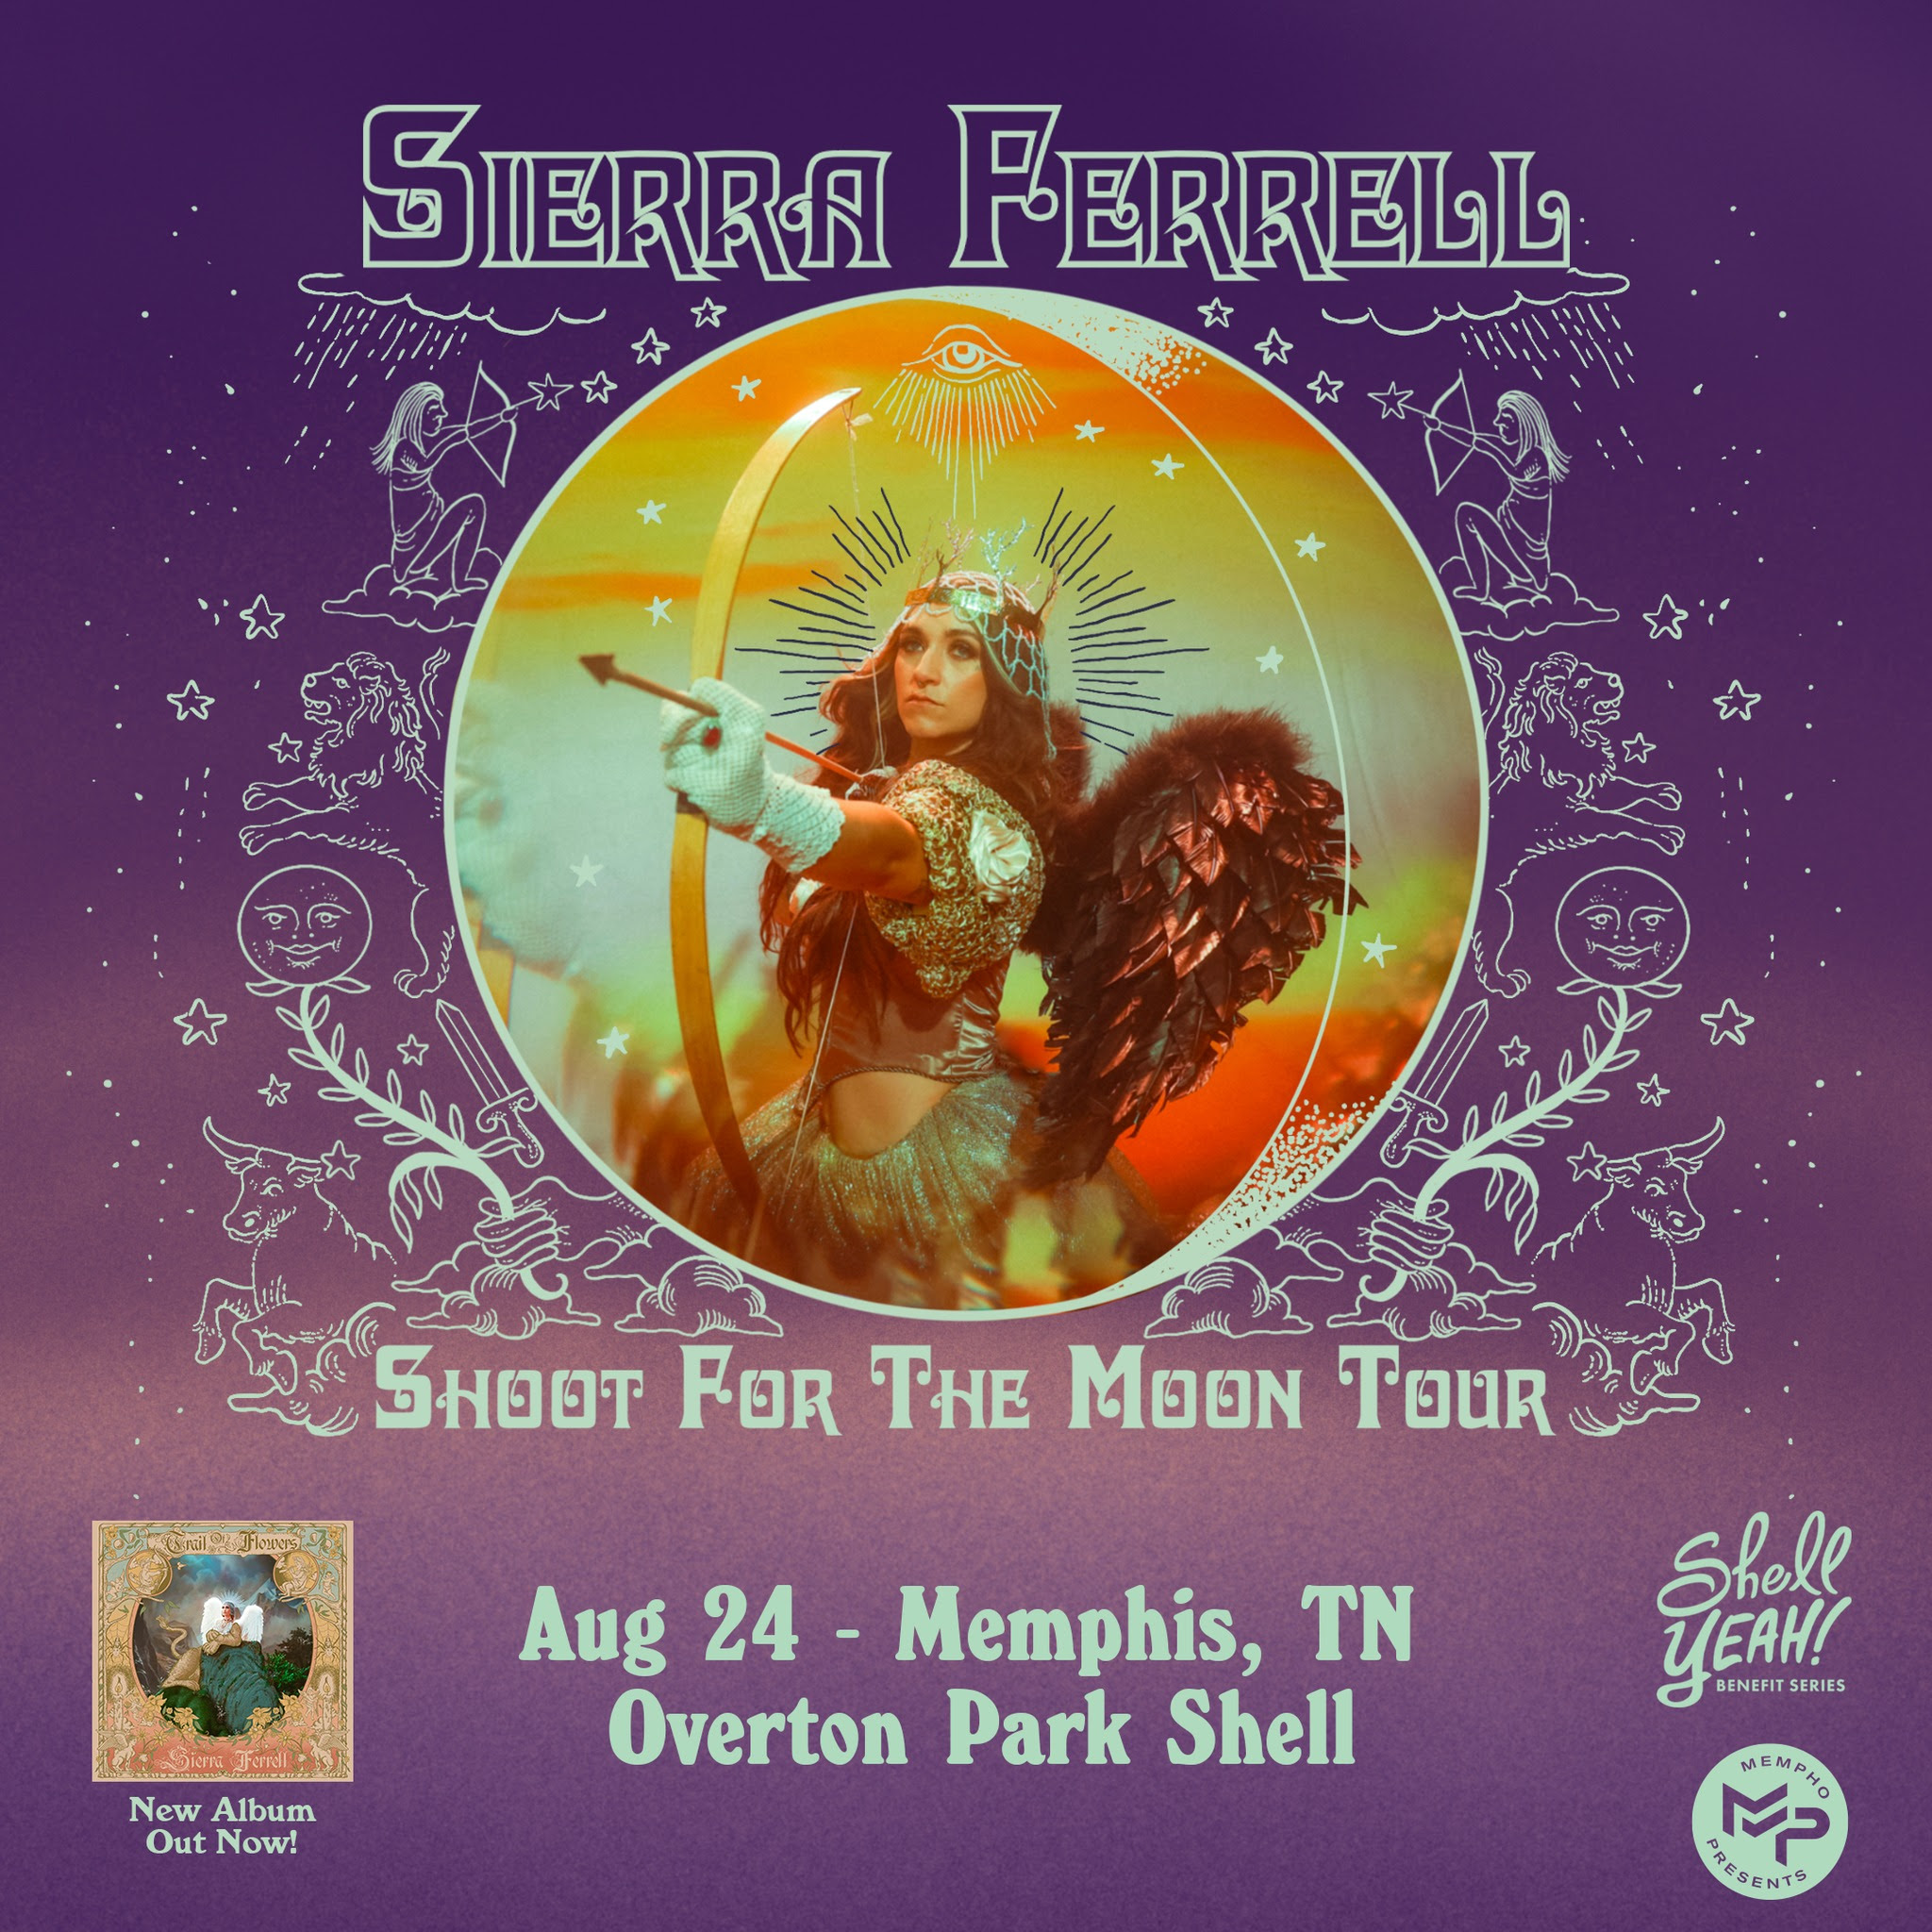 Promotional poster for Sierra Ferrell's "Shoot for the Moon Tour" featuring tour dates and an illustrated portrait of the artist in a circle surrounded by celestial graphics.